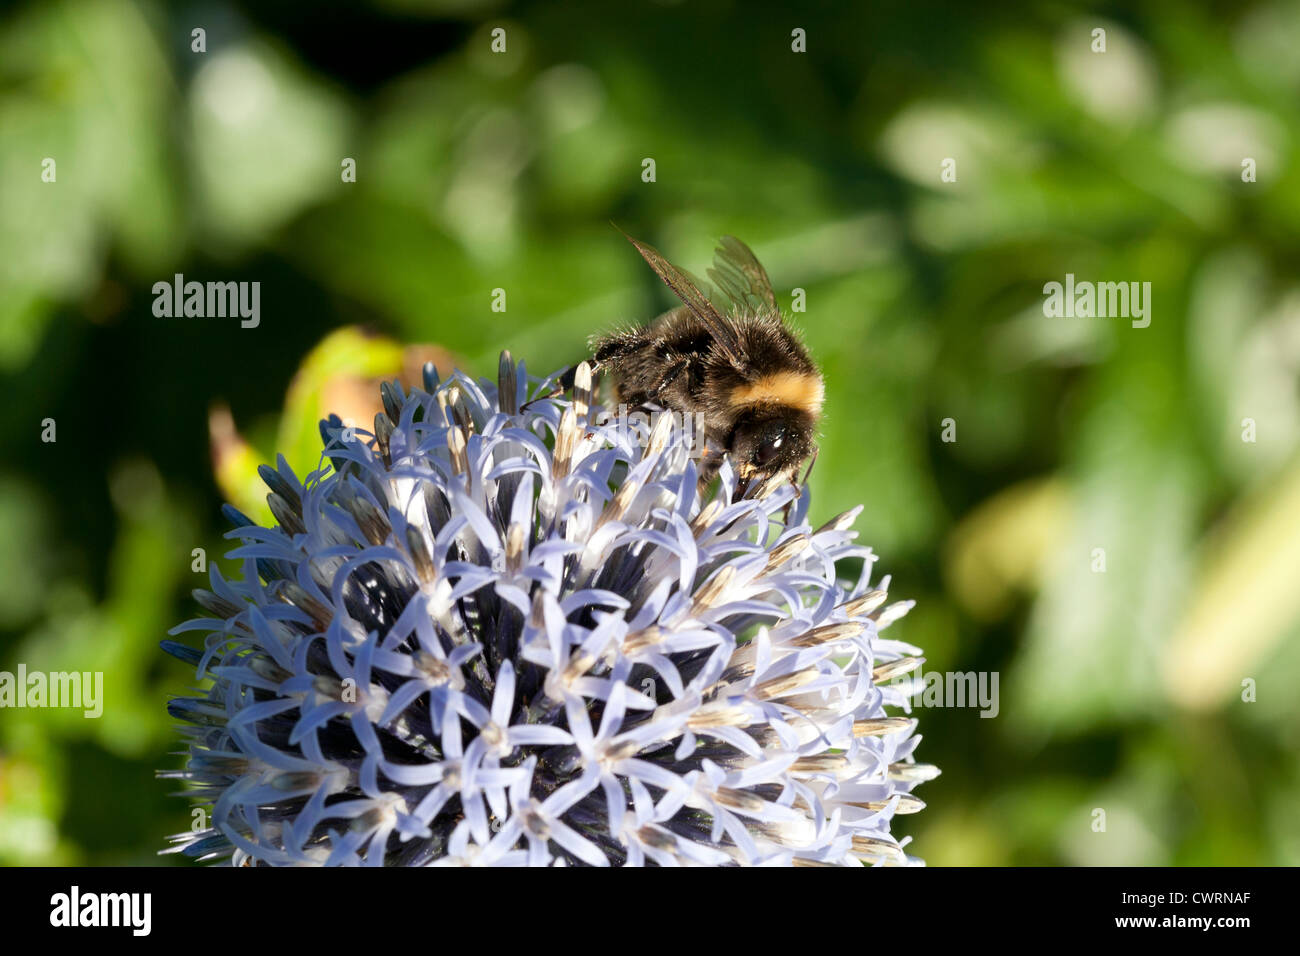 A single bee on the head of a globe thistle with green out of focus background Stock Photo